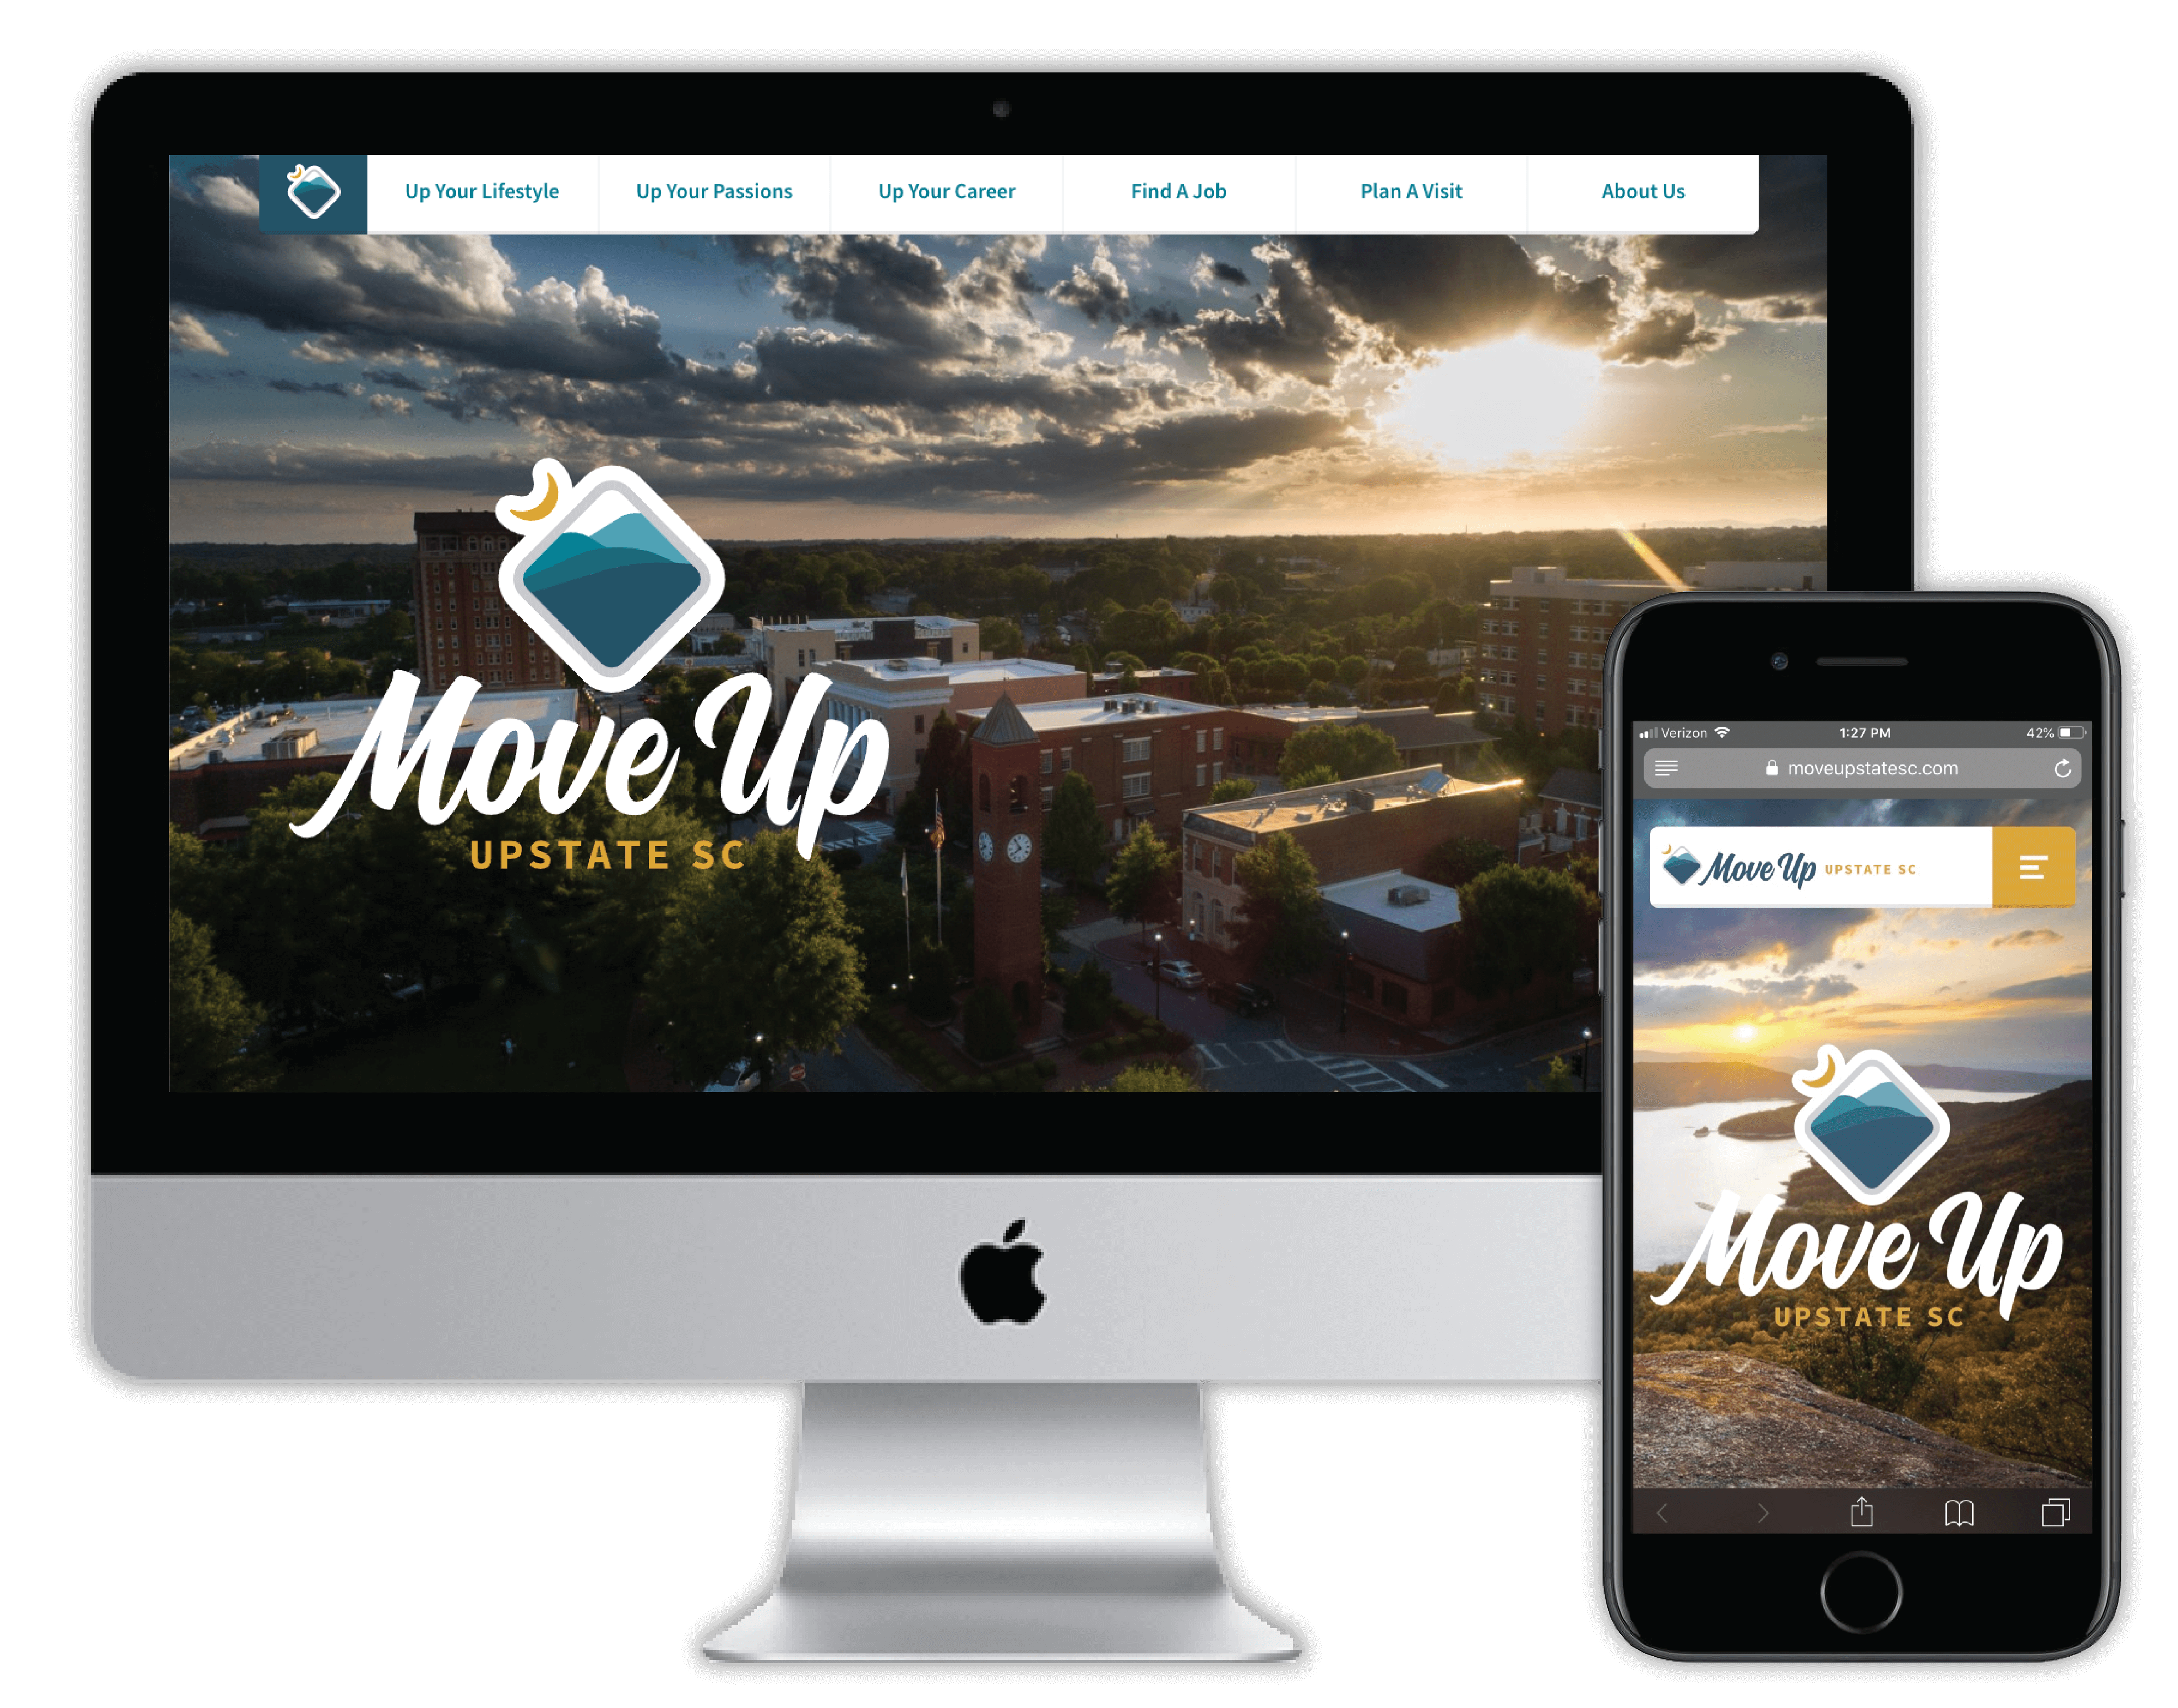 Move Up Upstate SC website homepage mock-up.